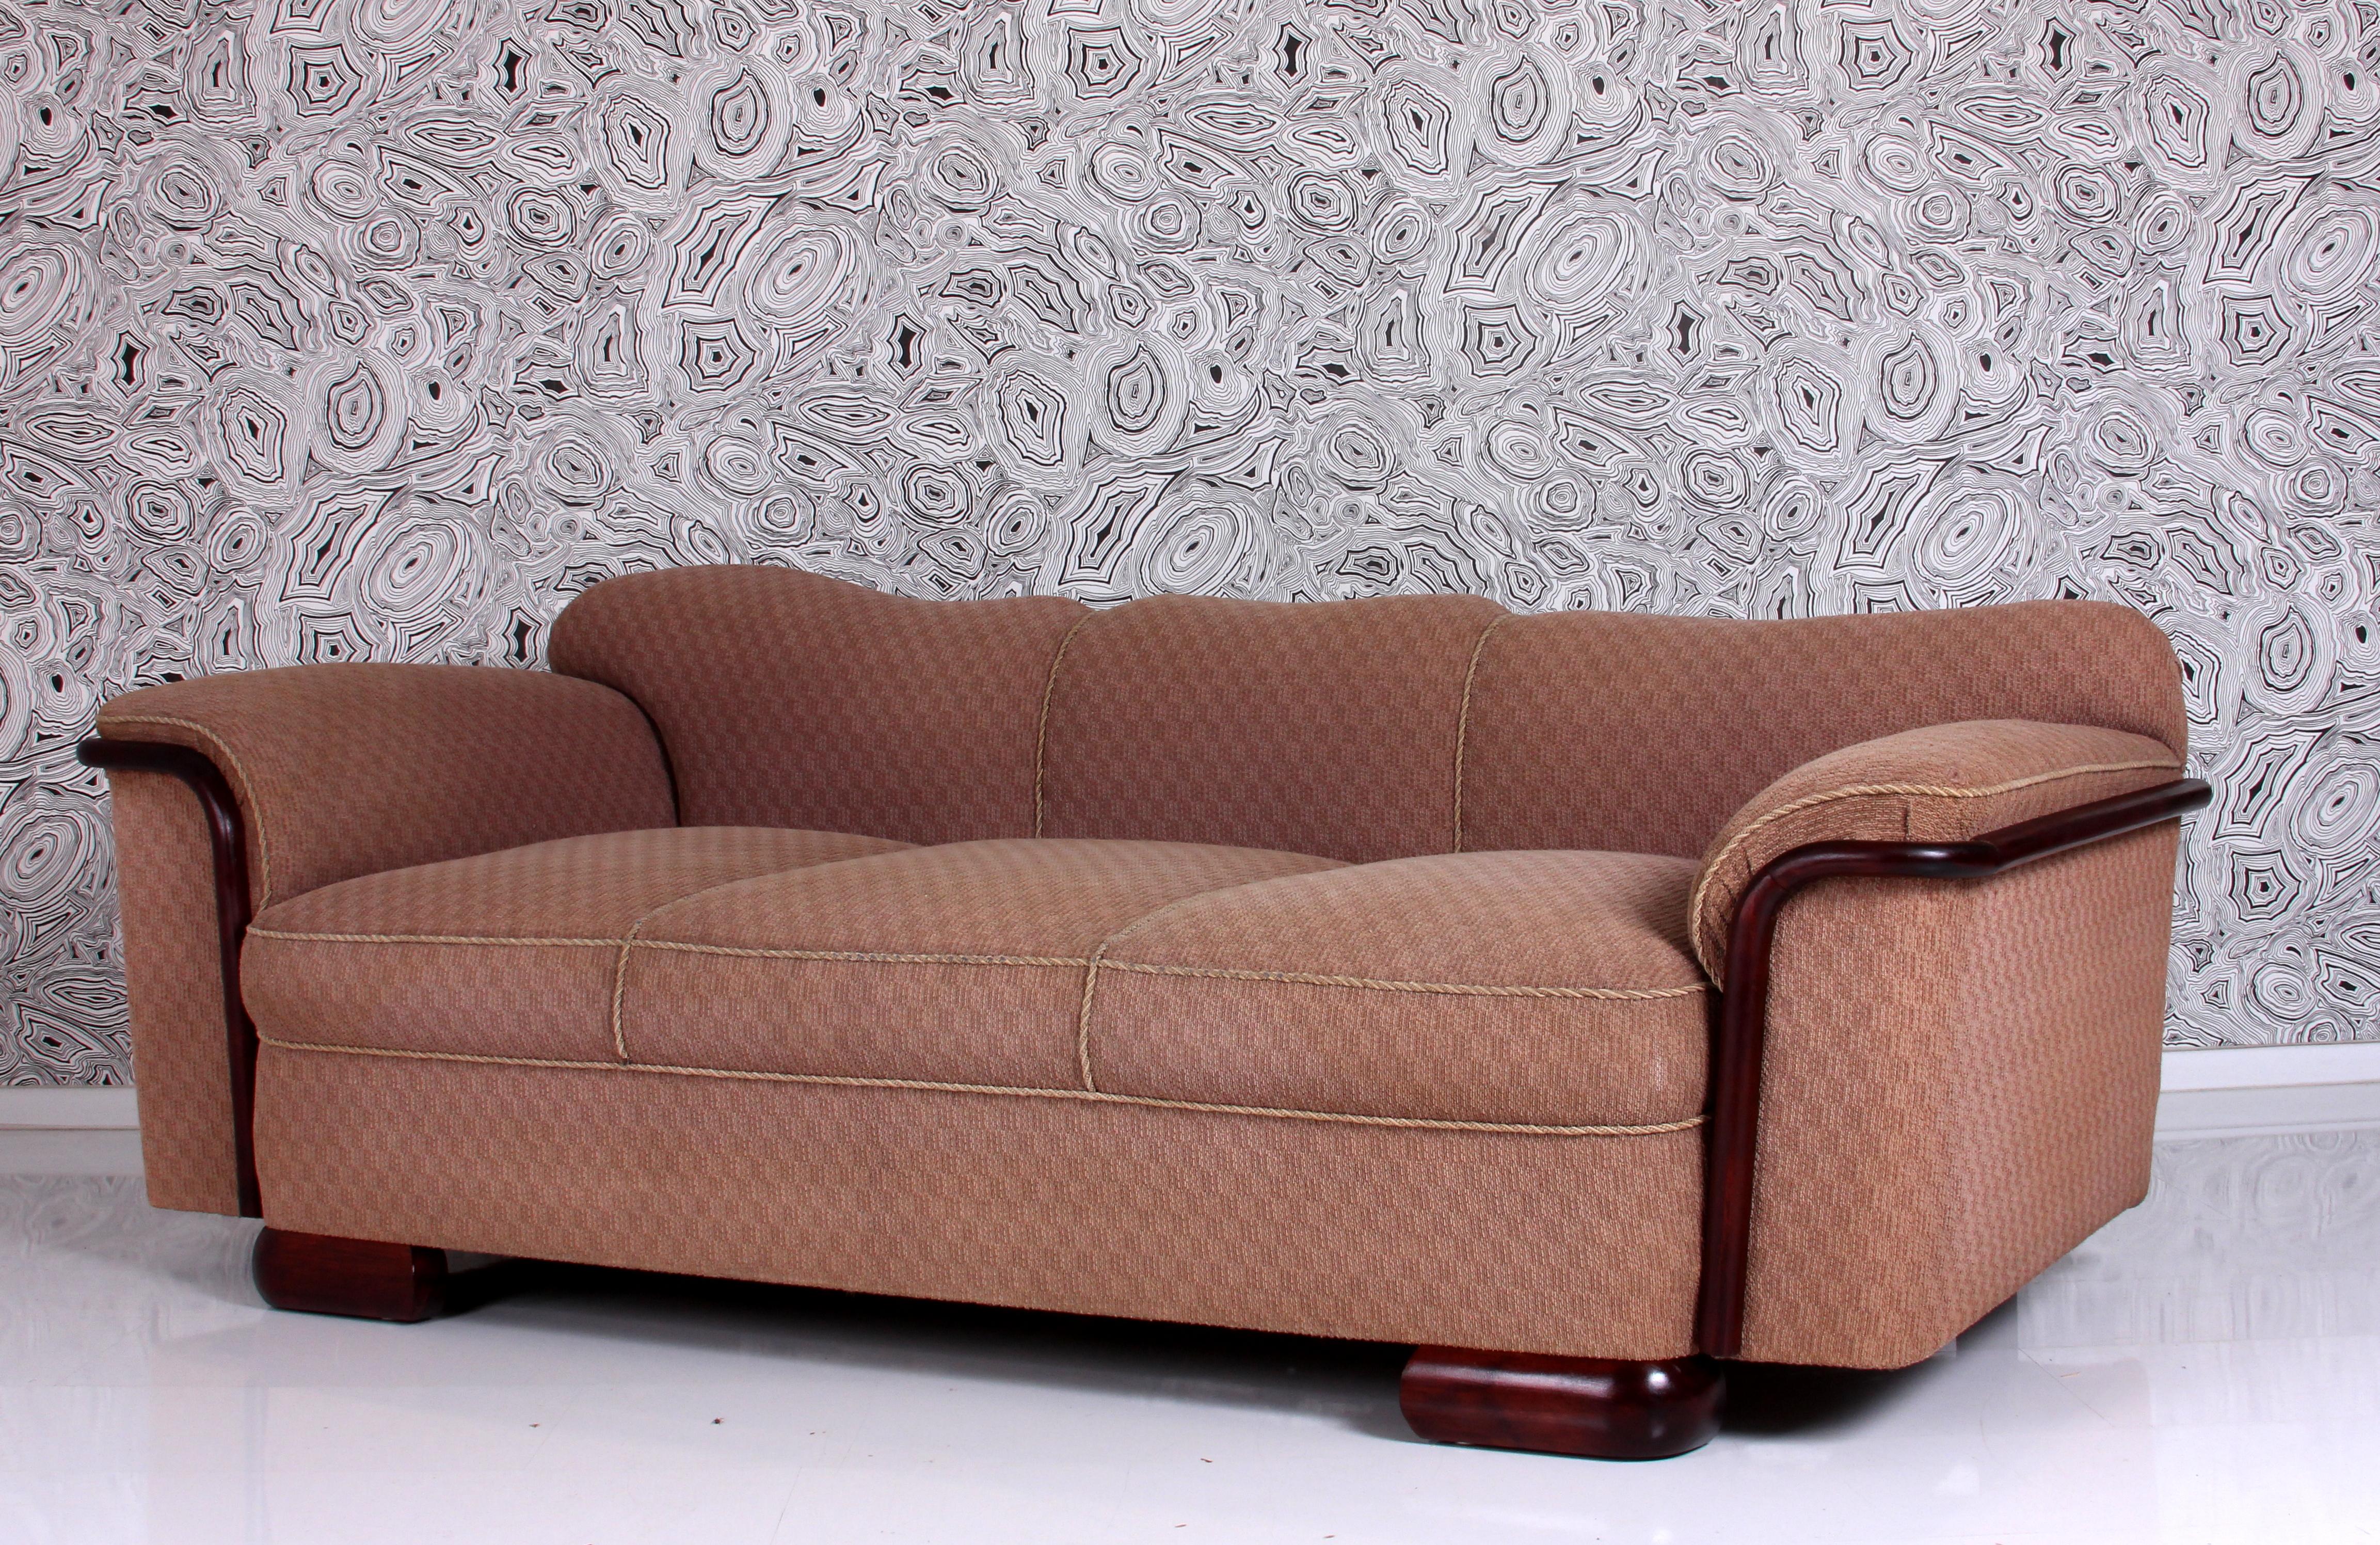 1930 couch